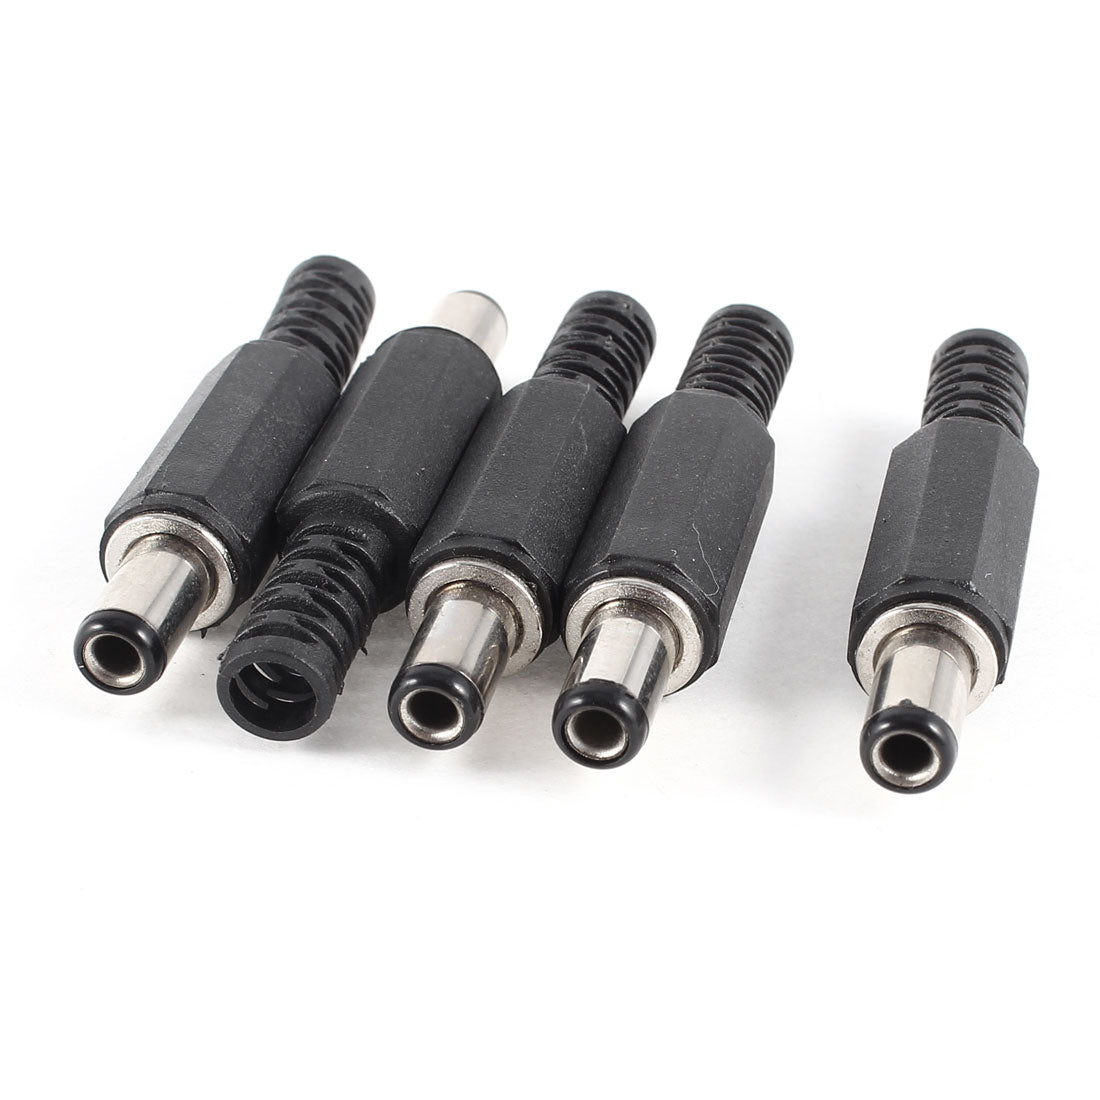 uxcell Uxcell 5 Pcs DC Cable Jack Power Supply Male Connector 5.5mmx2.5mm